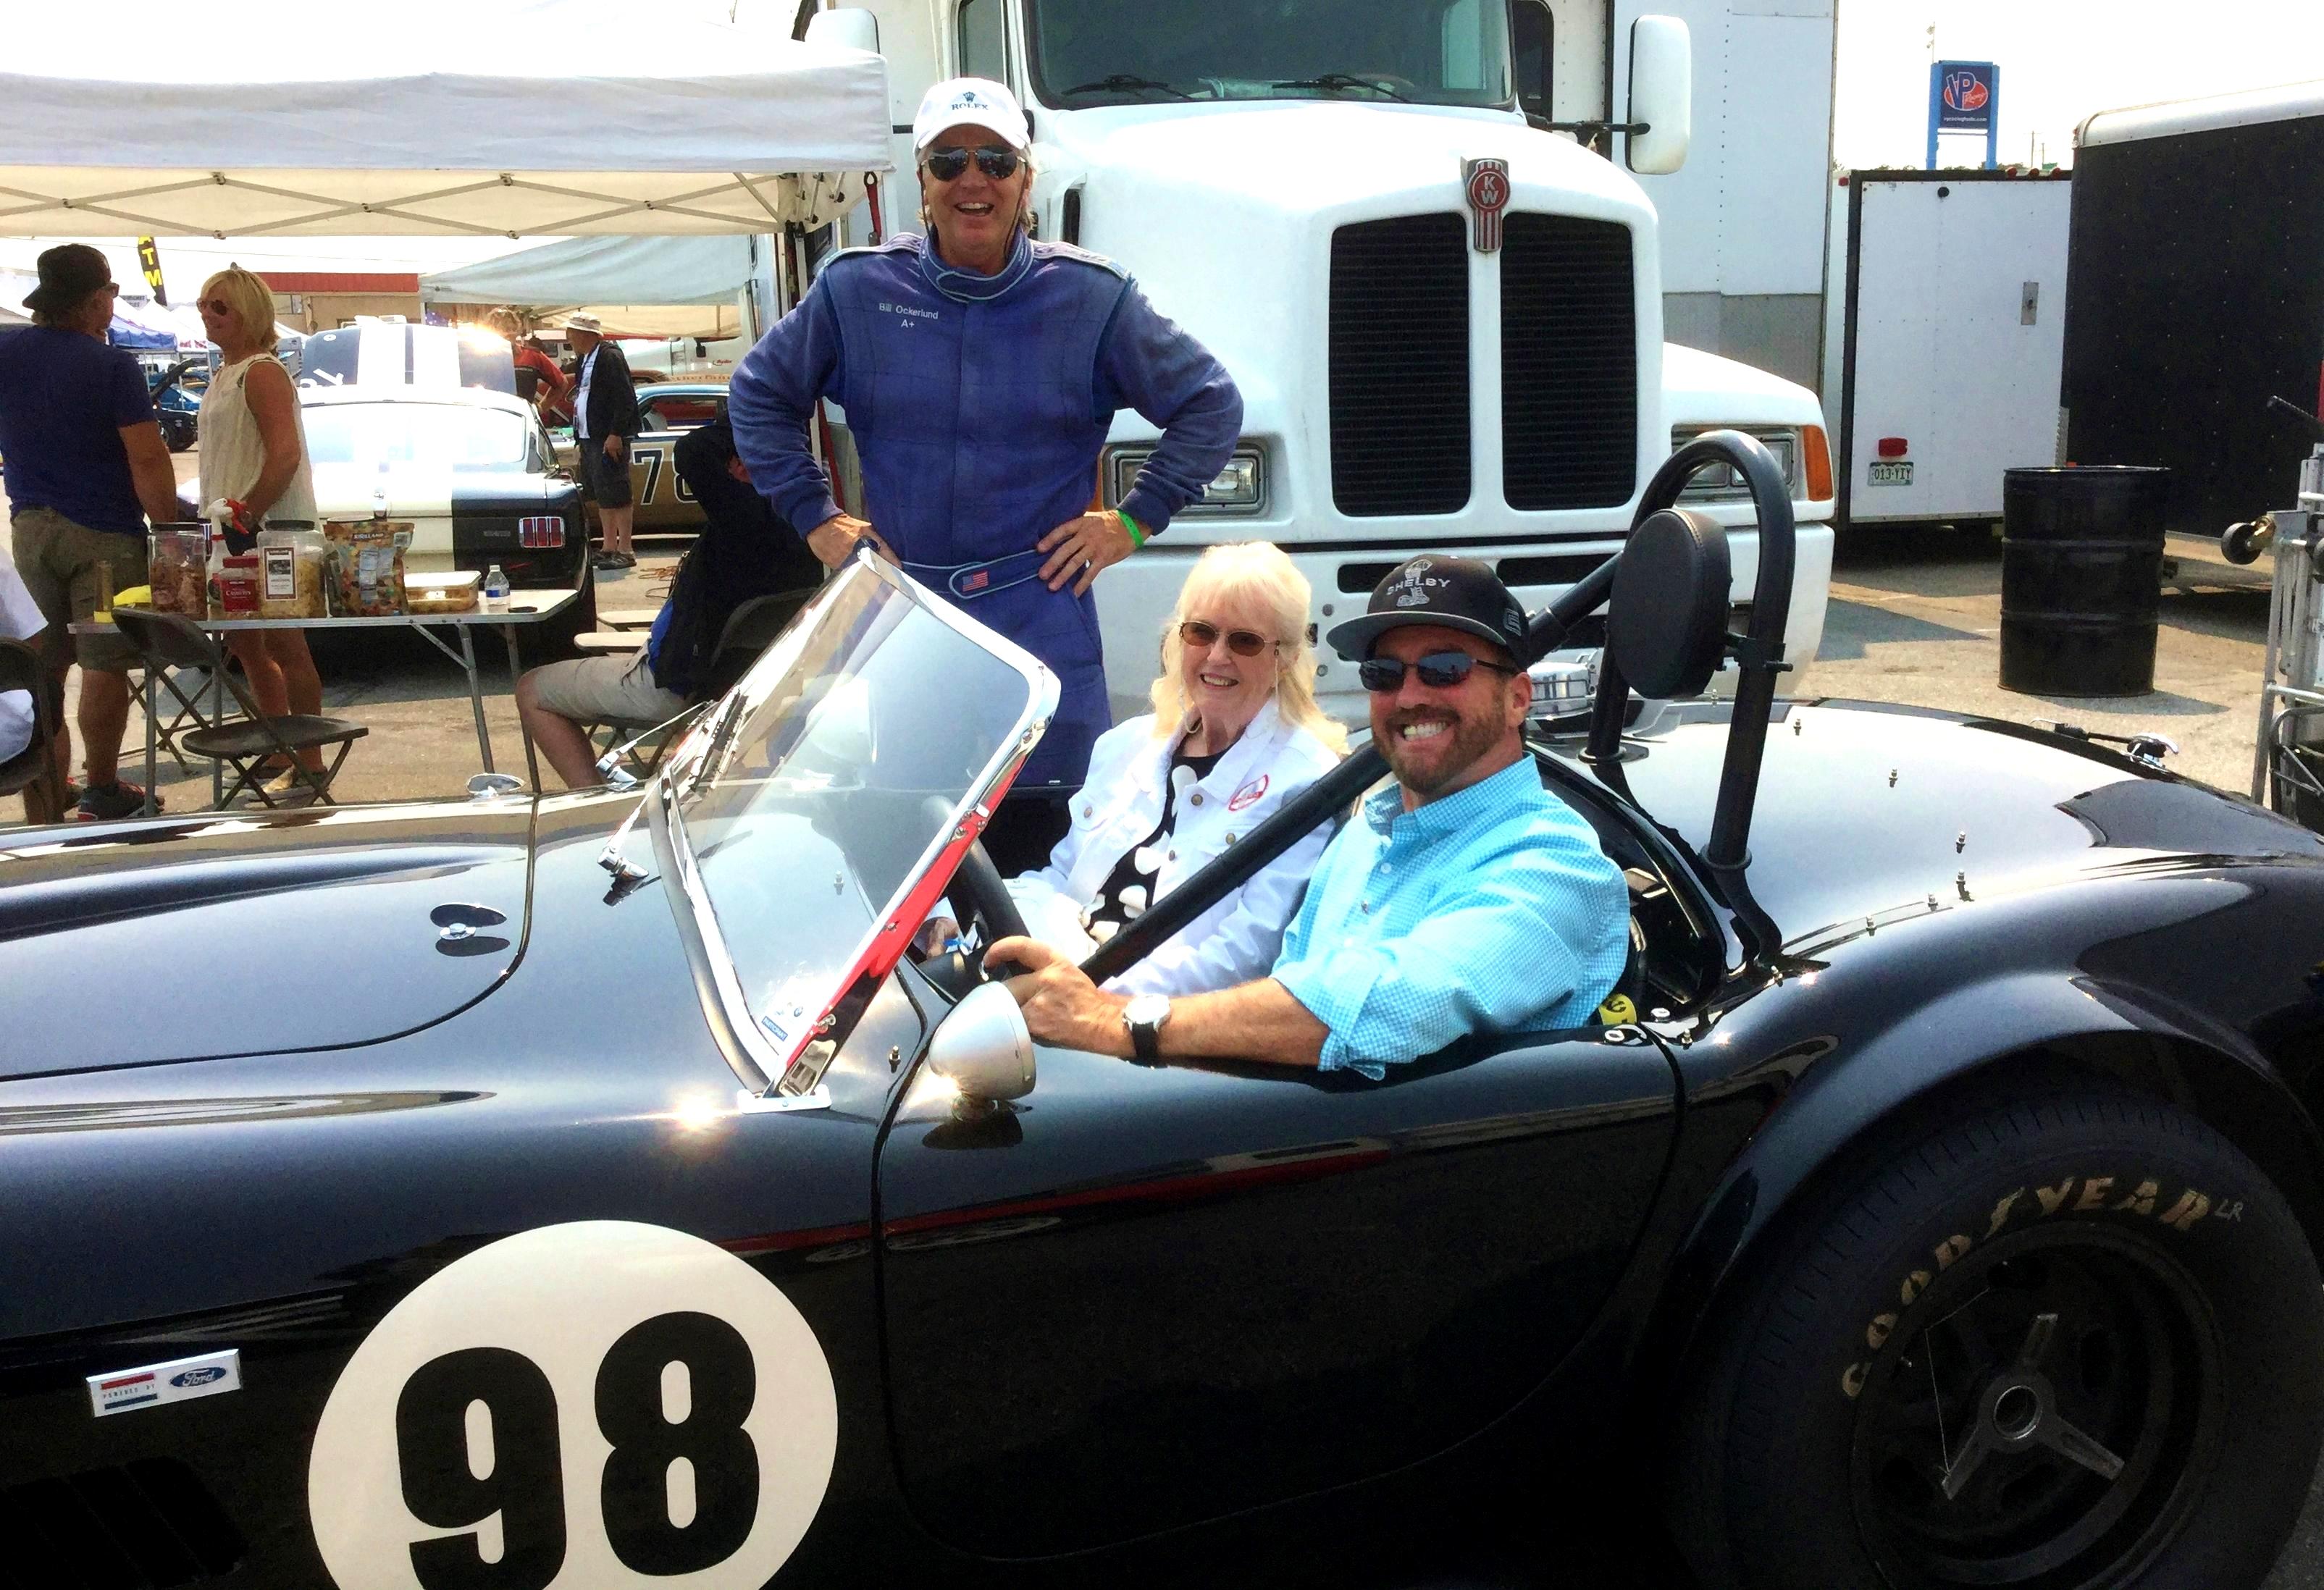 Dave MacDonald races Shelby Cobra 260 to first ever win at Riverside